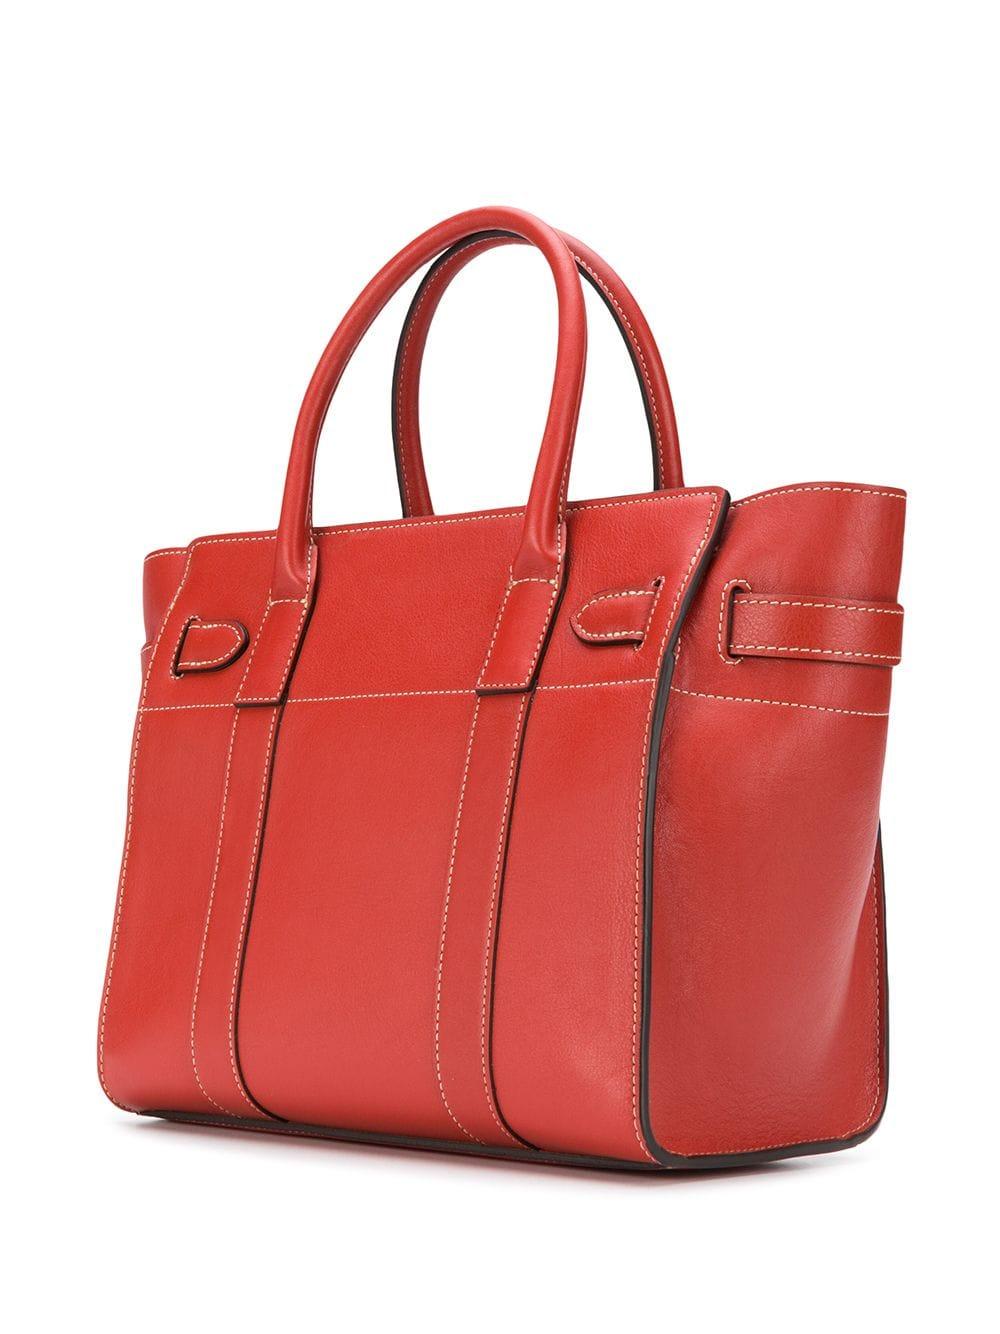 Mulberry Medium Tote Bag in Red - Lyst